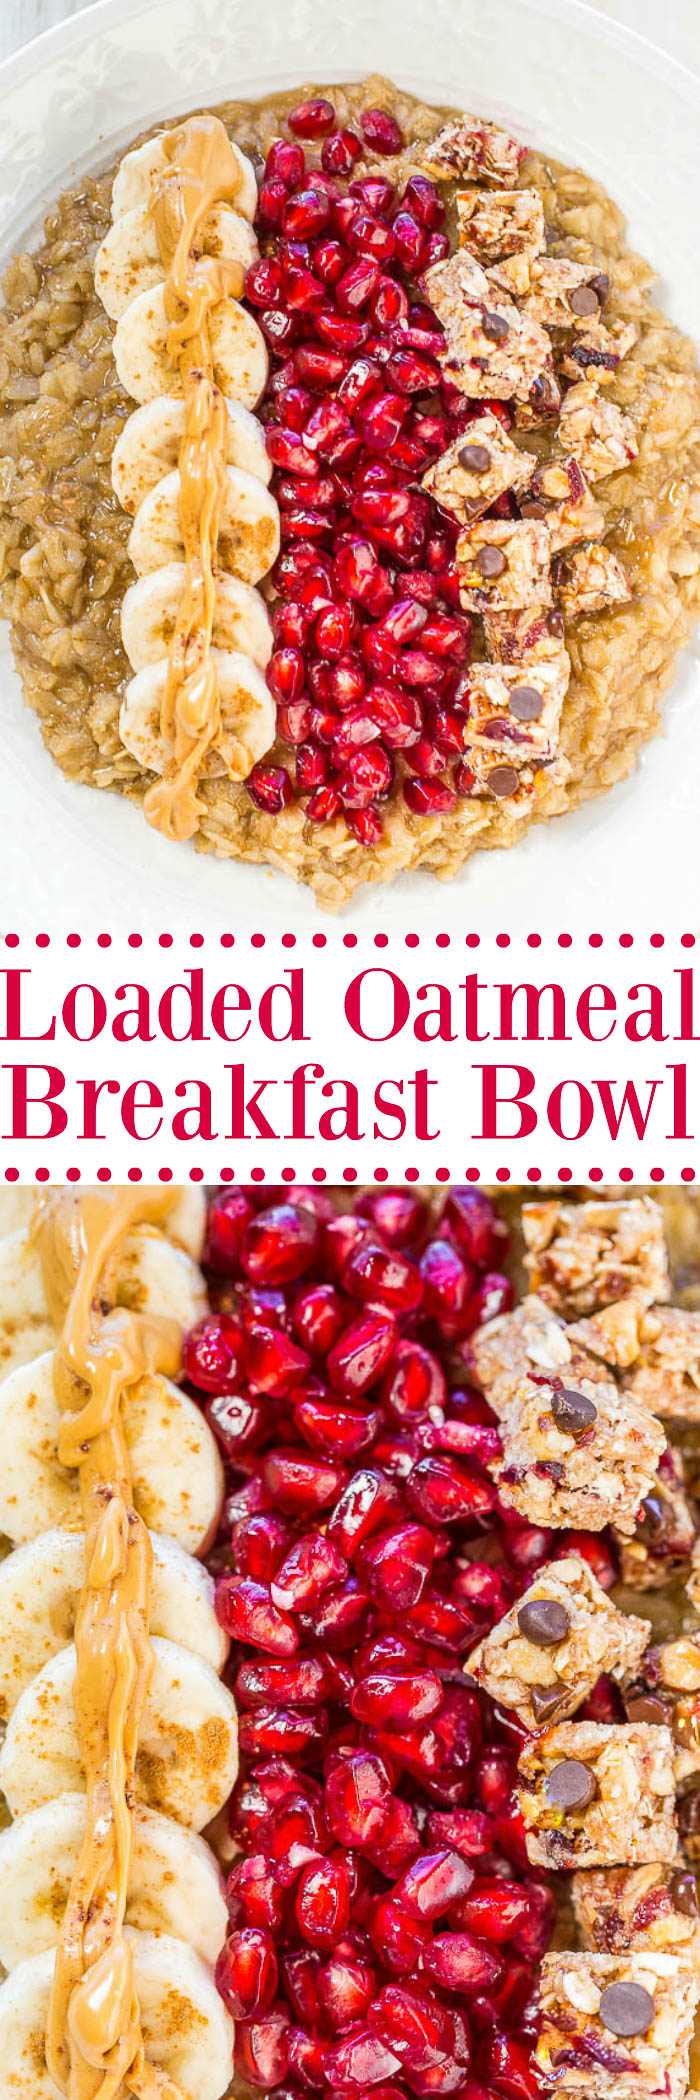 Loaded Oatmeal Breakfast Bowl - No more boring oatmeal!! This bowl is loaded with goodies so you'll stay full and satisfied for hours!! Healthy, fast, and easy!!